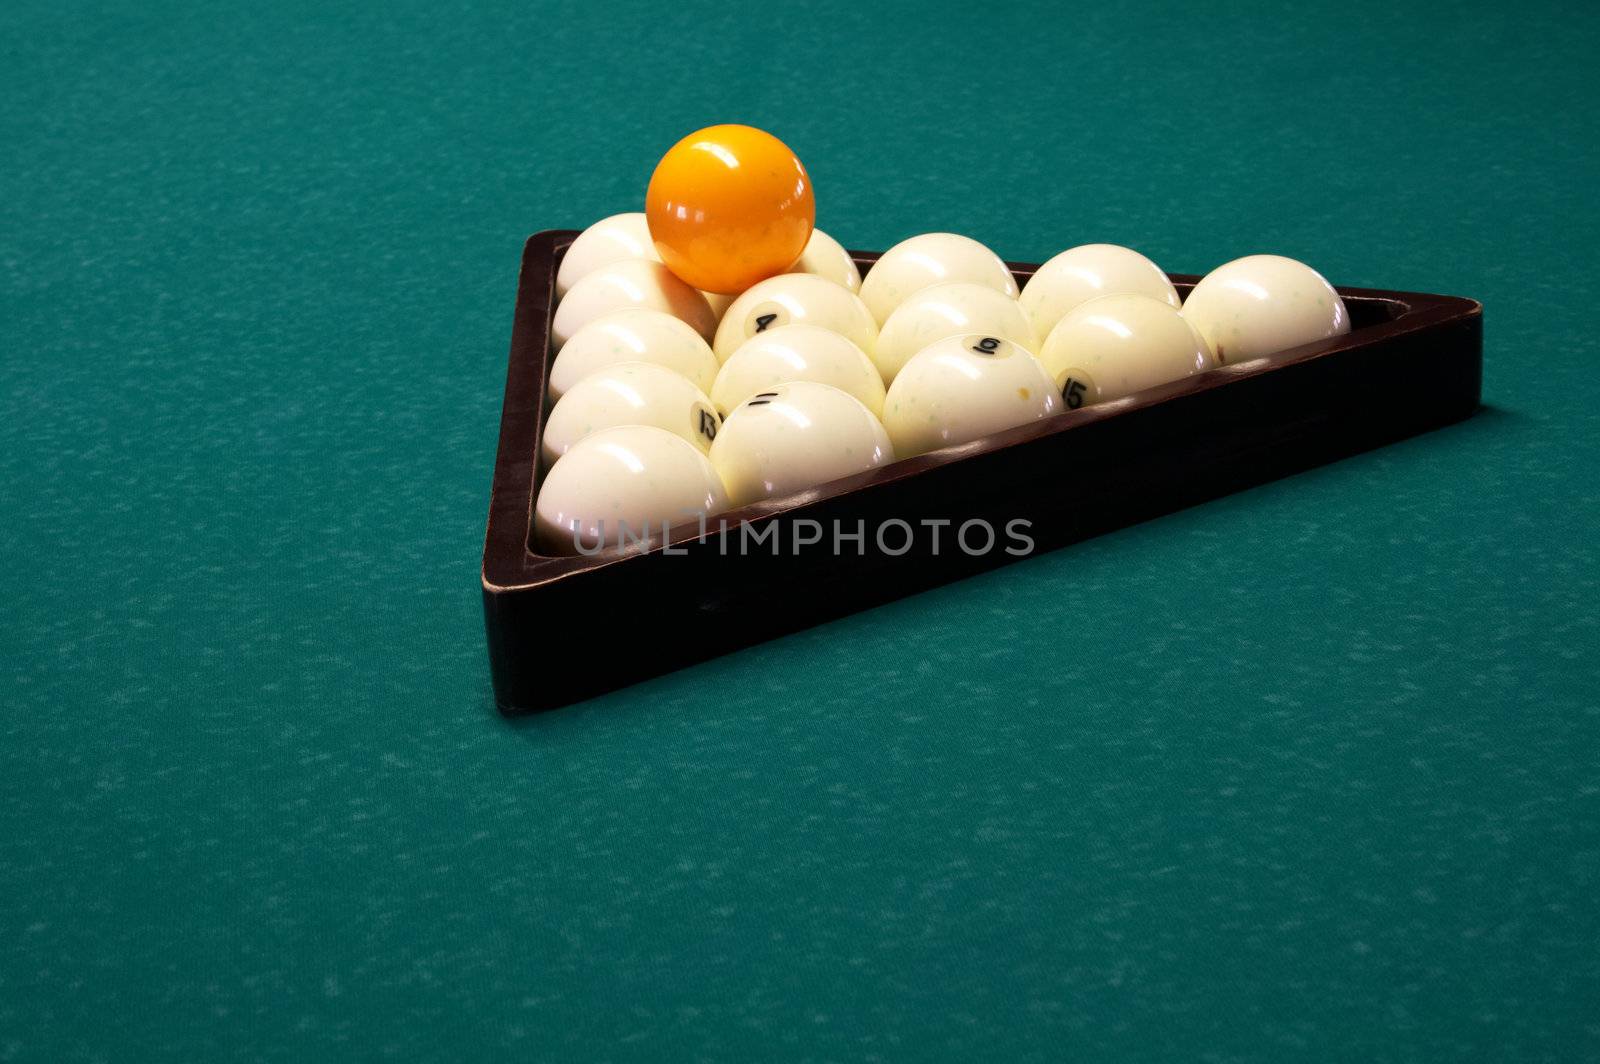 Billiard spheres in a triangle on a table